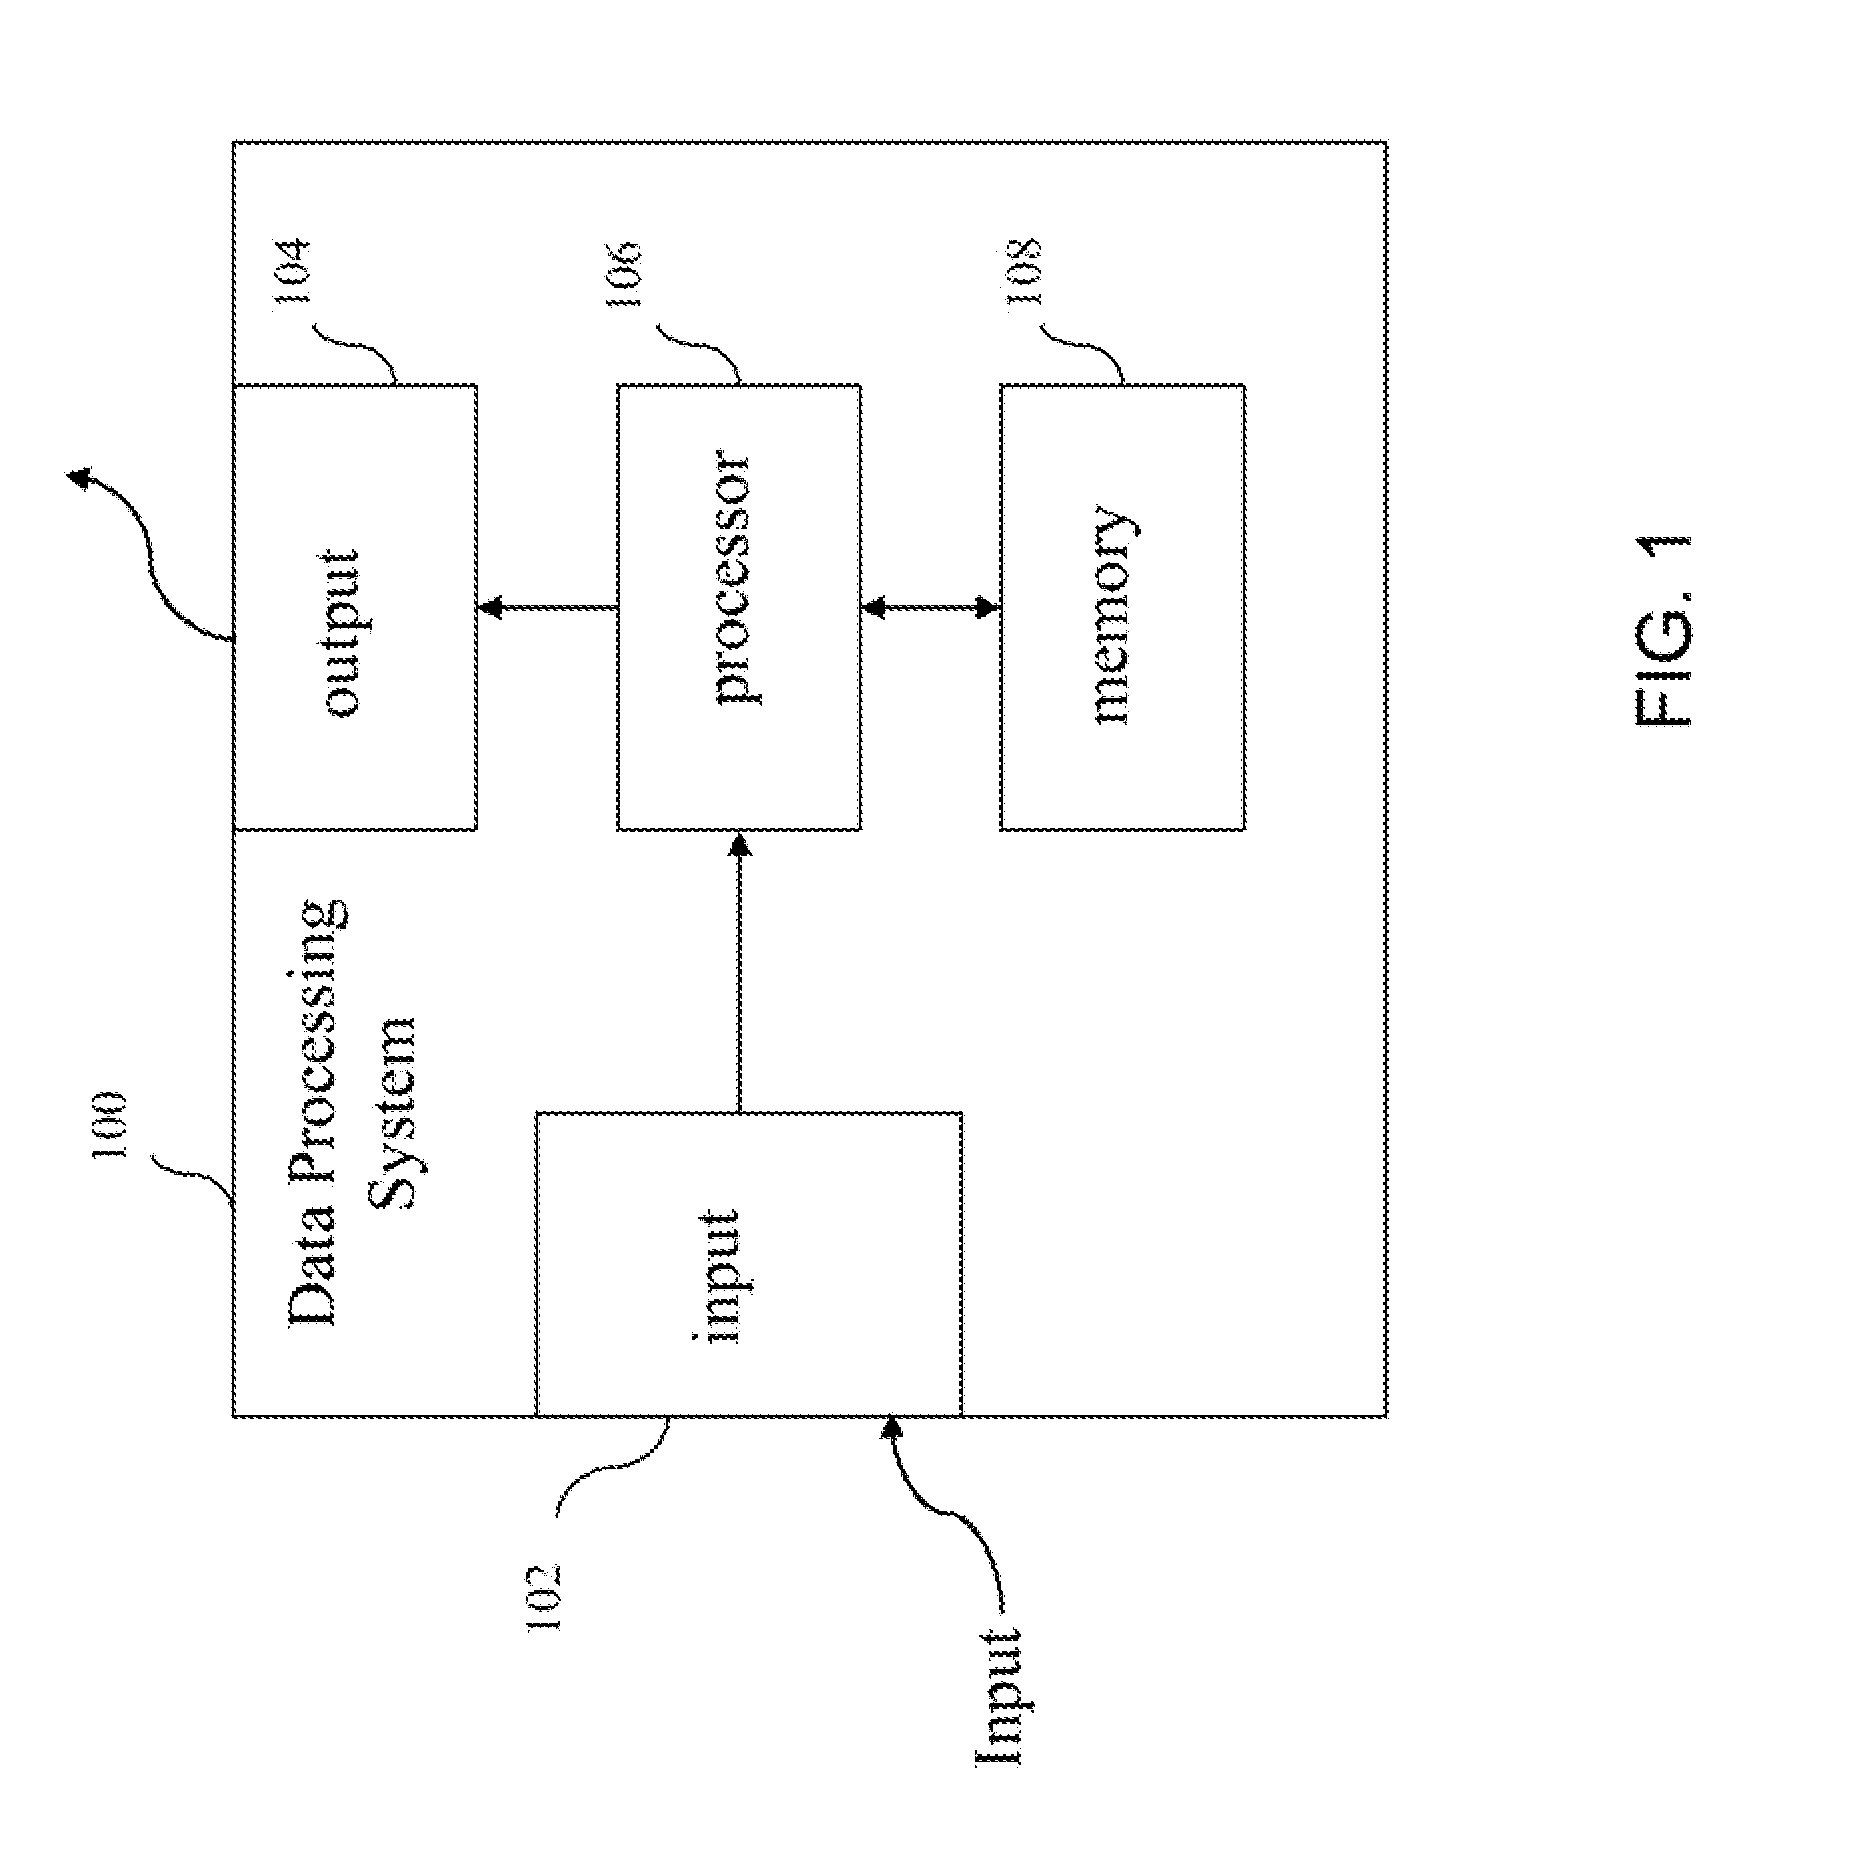 System for representing, storing, and reconstructing an input signal